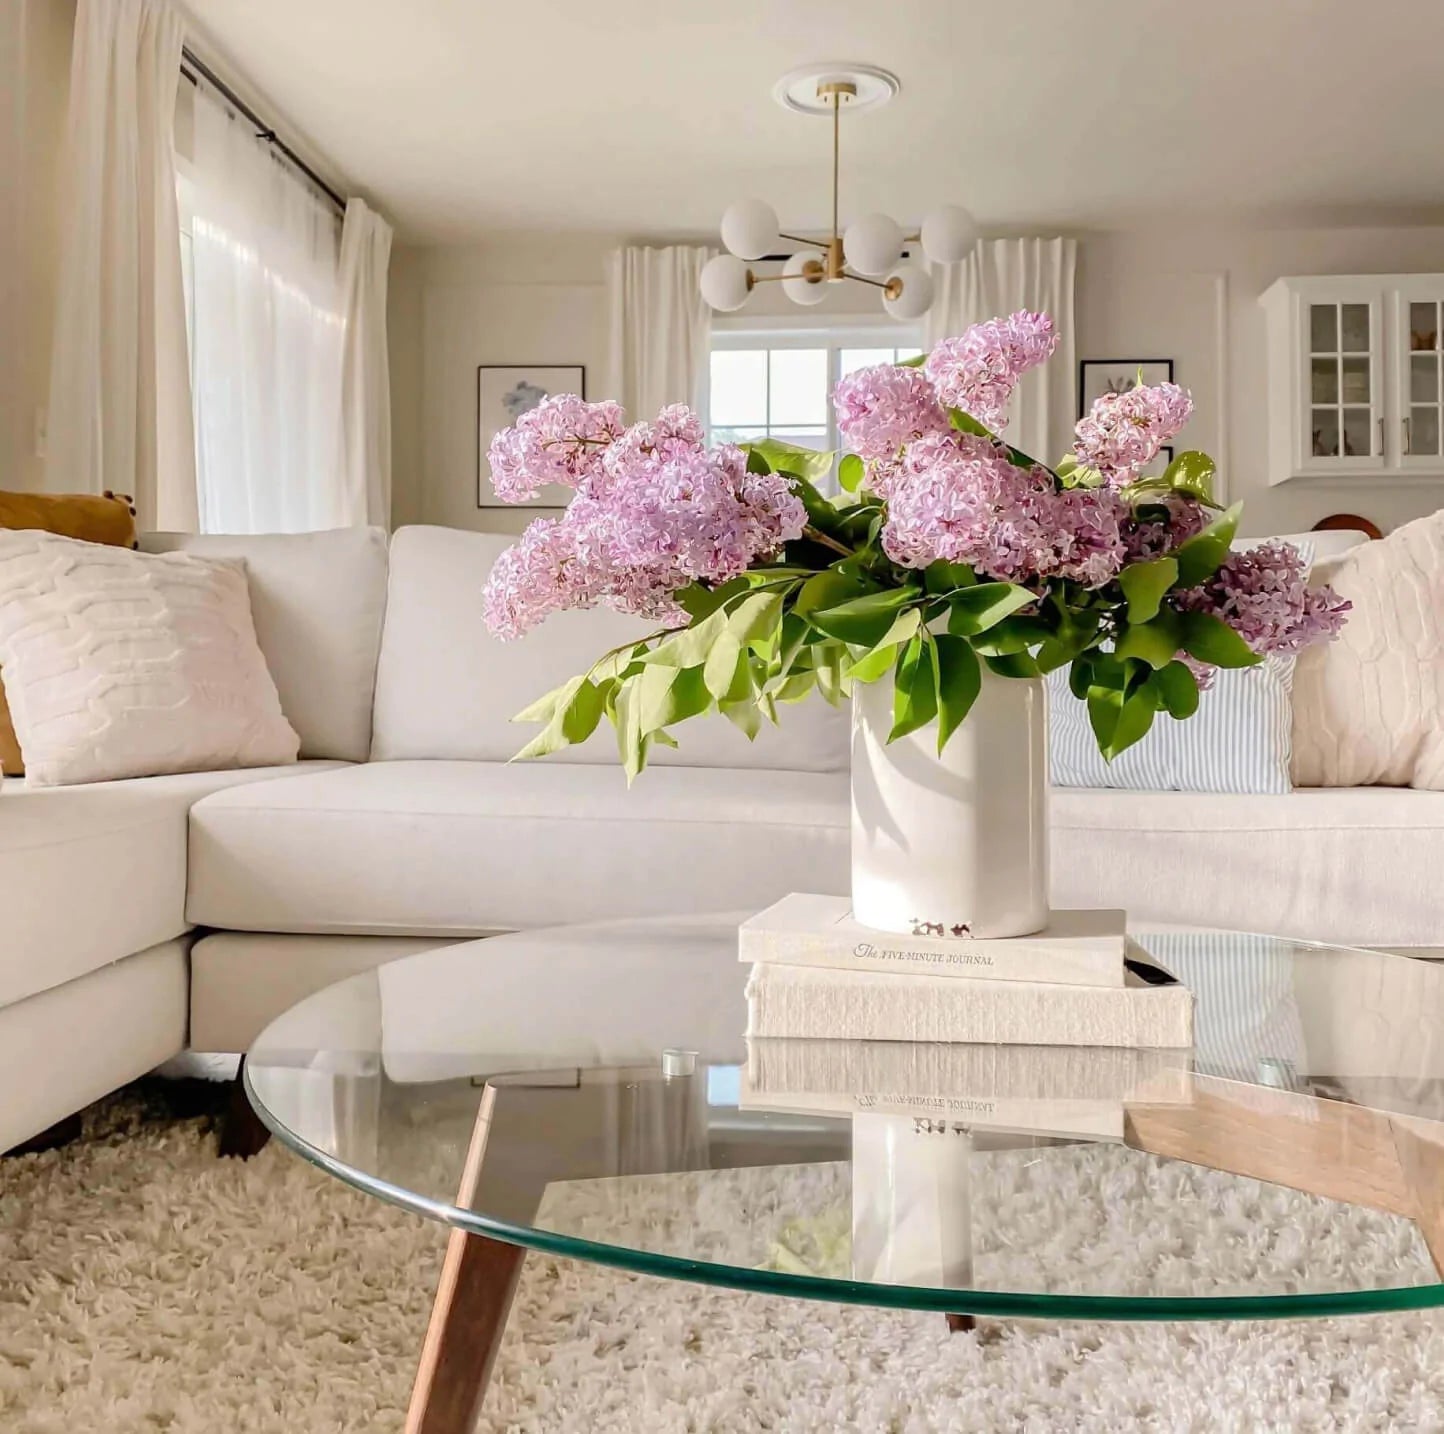 Angela's (@saffronavenue). Pictured: Mota Chaise Sectional in Texture Oyster